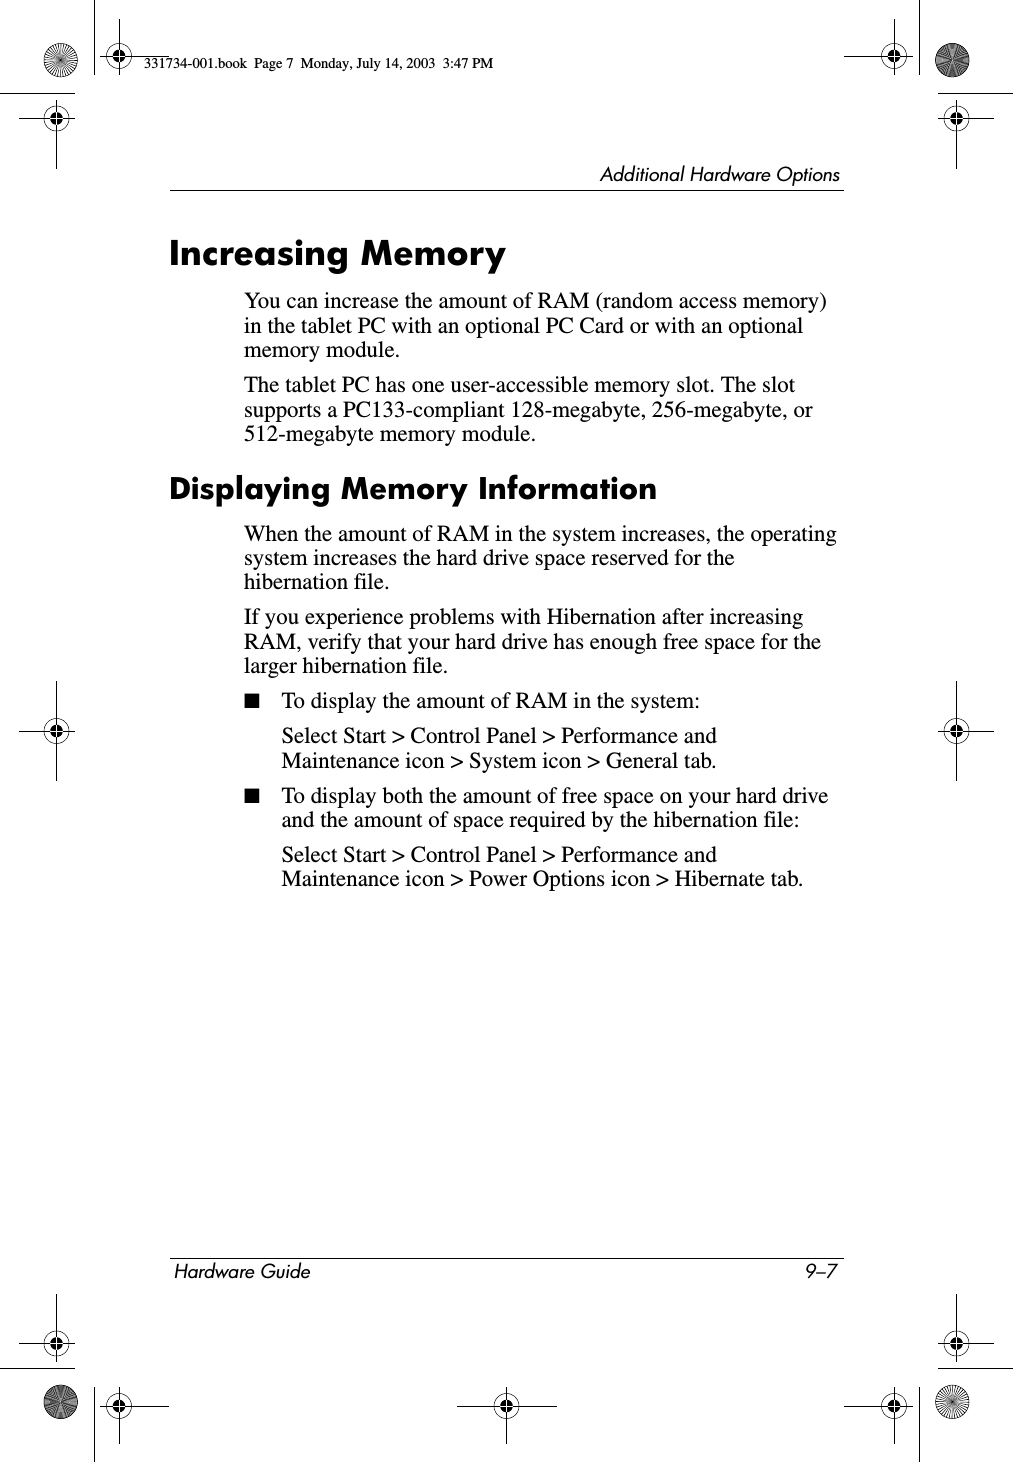 Additional Hardware OptionsHardware Guide 9–7Increasing MemoryYou can increase the amount of RAM (random access memory) in the tablet PC with an optional PC Card or with an optional memory module.The tablet PC has one user-accessible memory slot. The slot supports a PC133-compliant 128-megabyte, 256-megabyte, or 512-megabyte memory module.Displaying Memory InformationWhen the amount of RAM in the system increases, the operating system increases the hard drive space reserved for the hibernation file.If you experience problems with Hibernation after increasing RAM, verify that your hard drive has enough free space for the larger hibernation file.■To display the amount of RAM in the system:Select Start &gt; Control Panel &gt; Performance and Maintenance icon &gt; System icon &gt; General tab.■To display both the amount of free space on your hard drive and the amount of space required by the hibernation file:Select Start &gt; Control Panel &gt; Performance and Maintenance icon &gt; Power Options icon &gt; Hibernate tab.331734-001.book  Page 7  Monday, July 14, 2003  3:47 PM